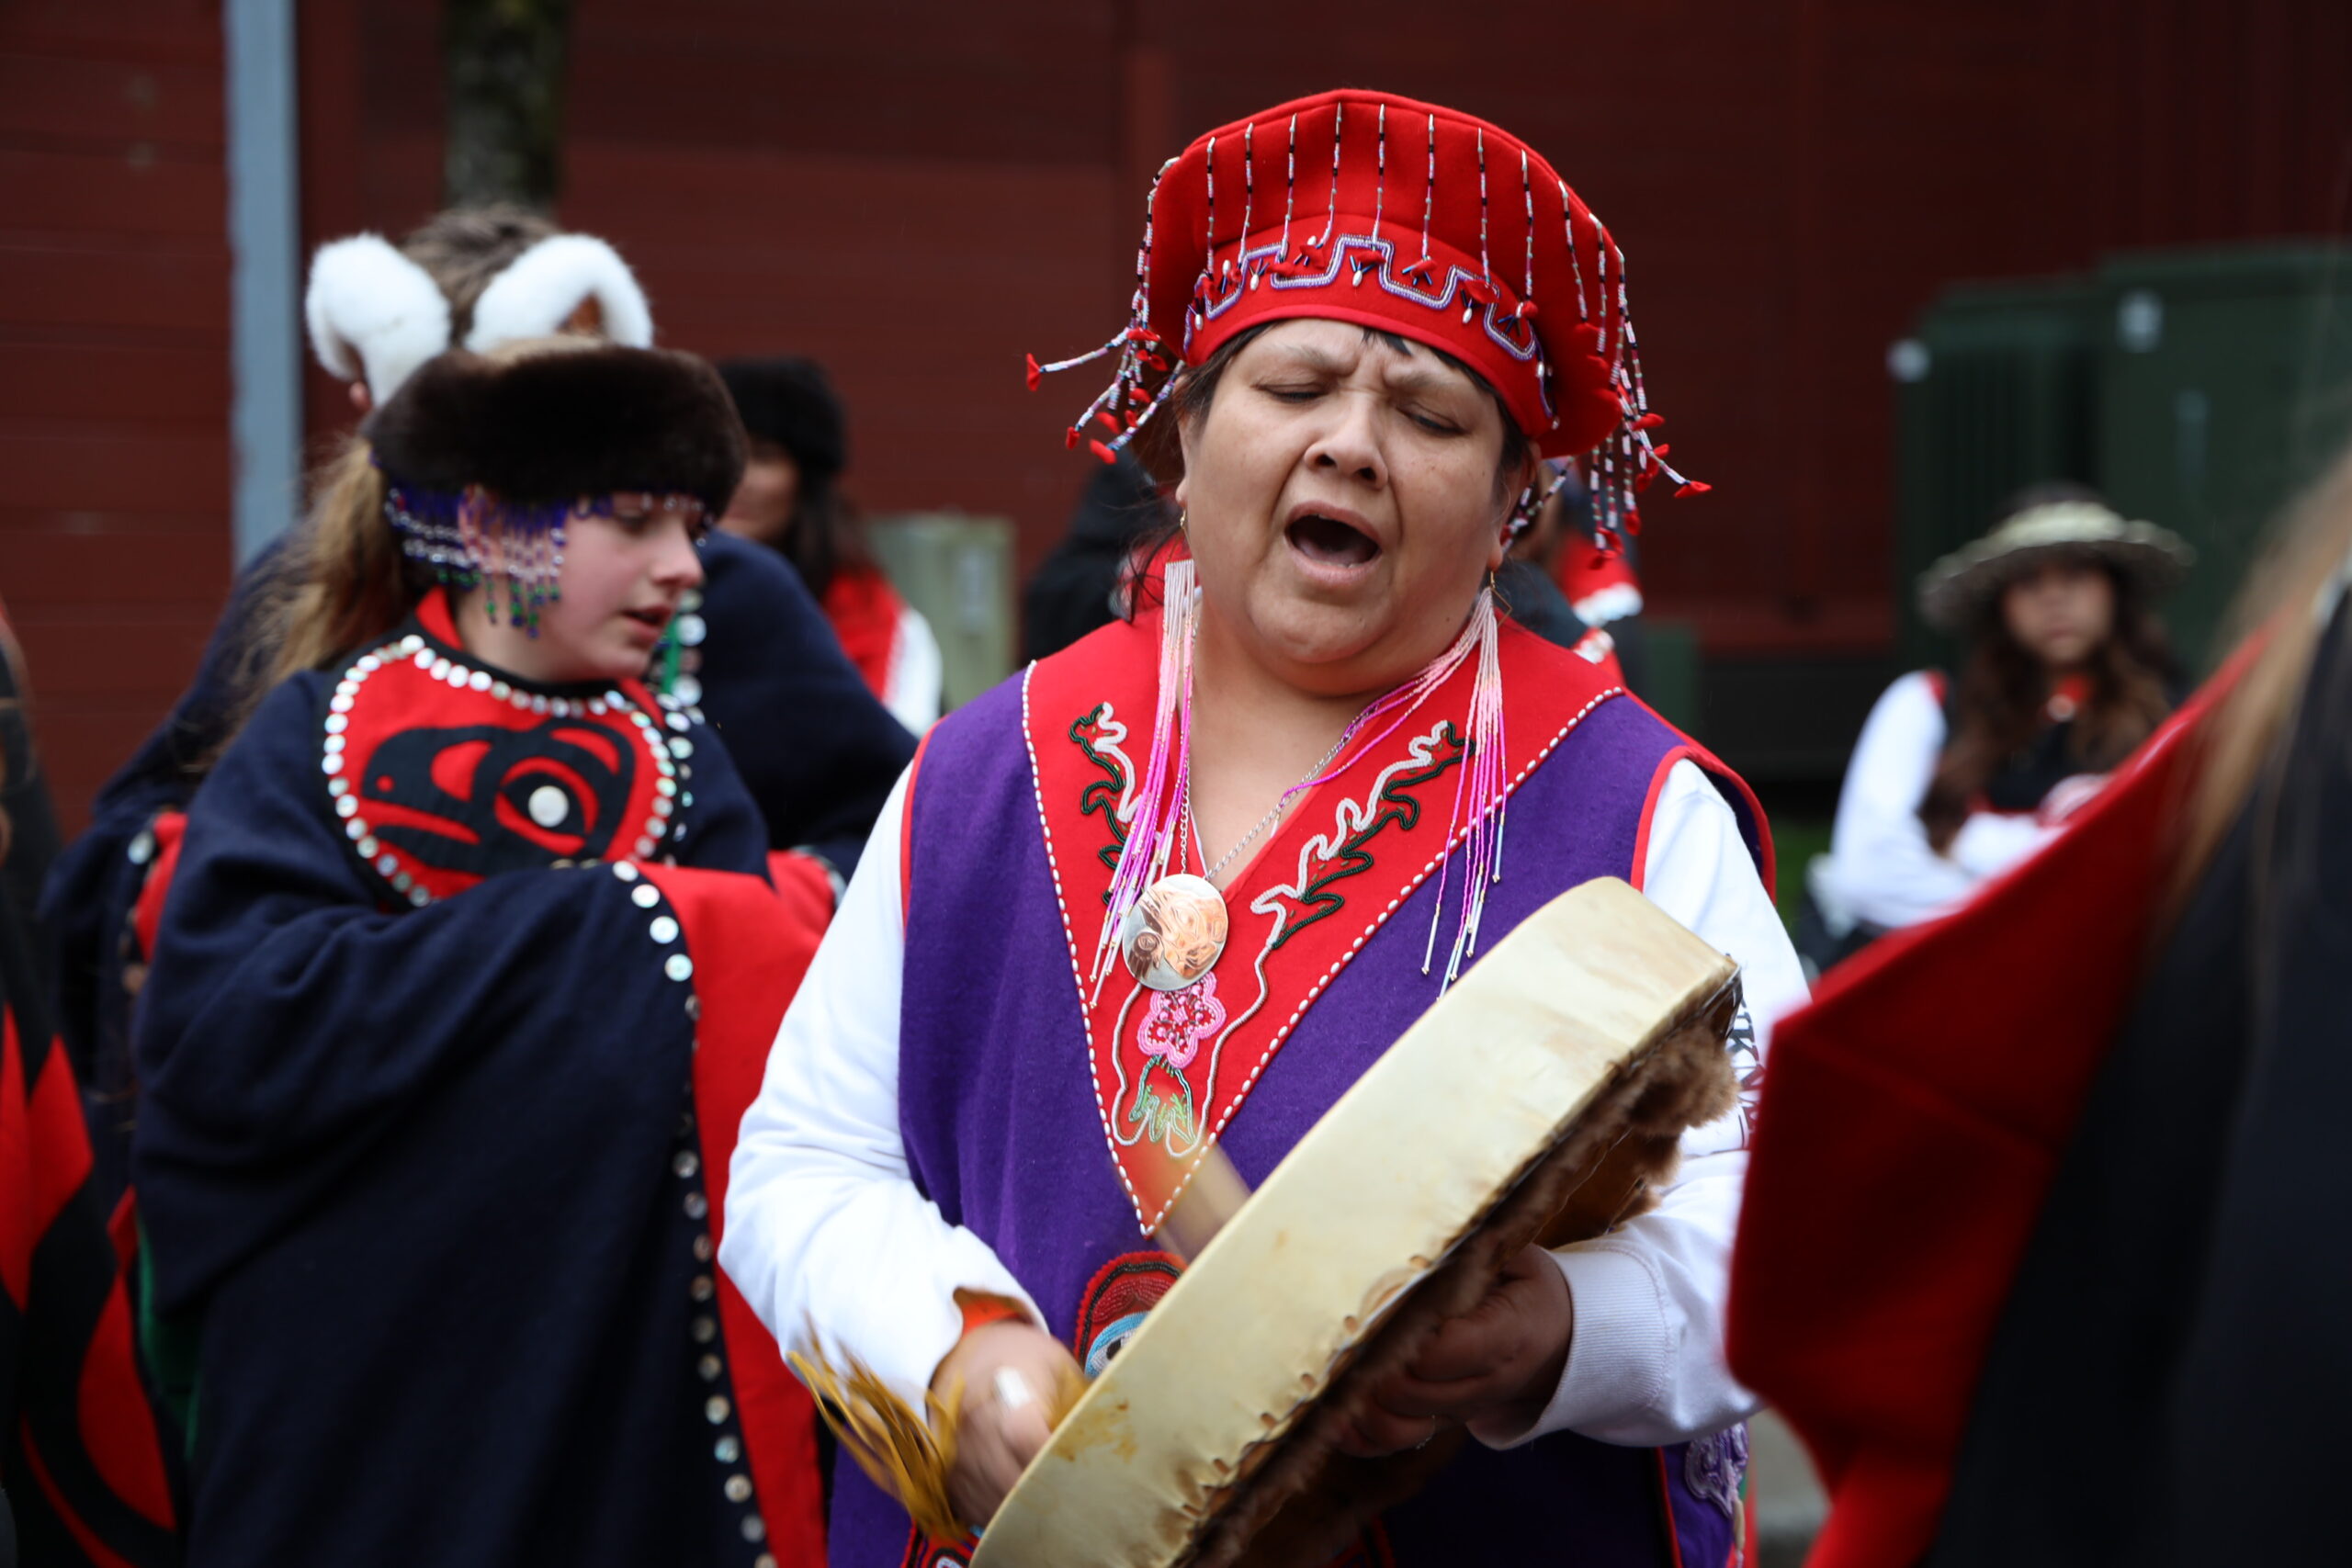 a woman drums in the street for a celebration